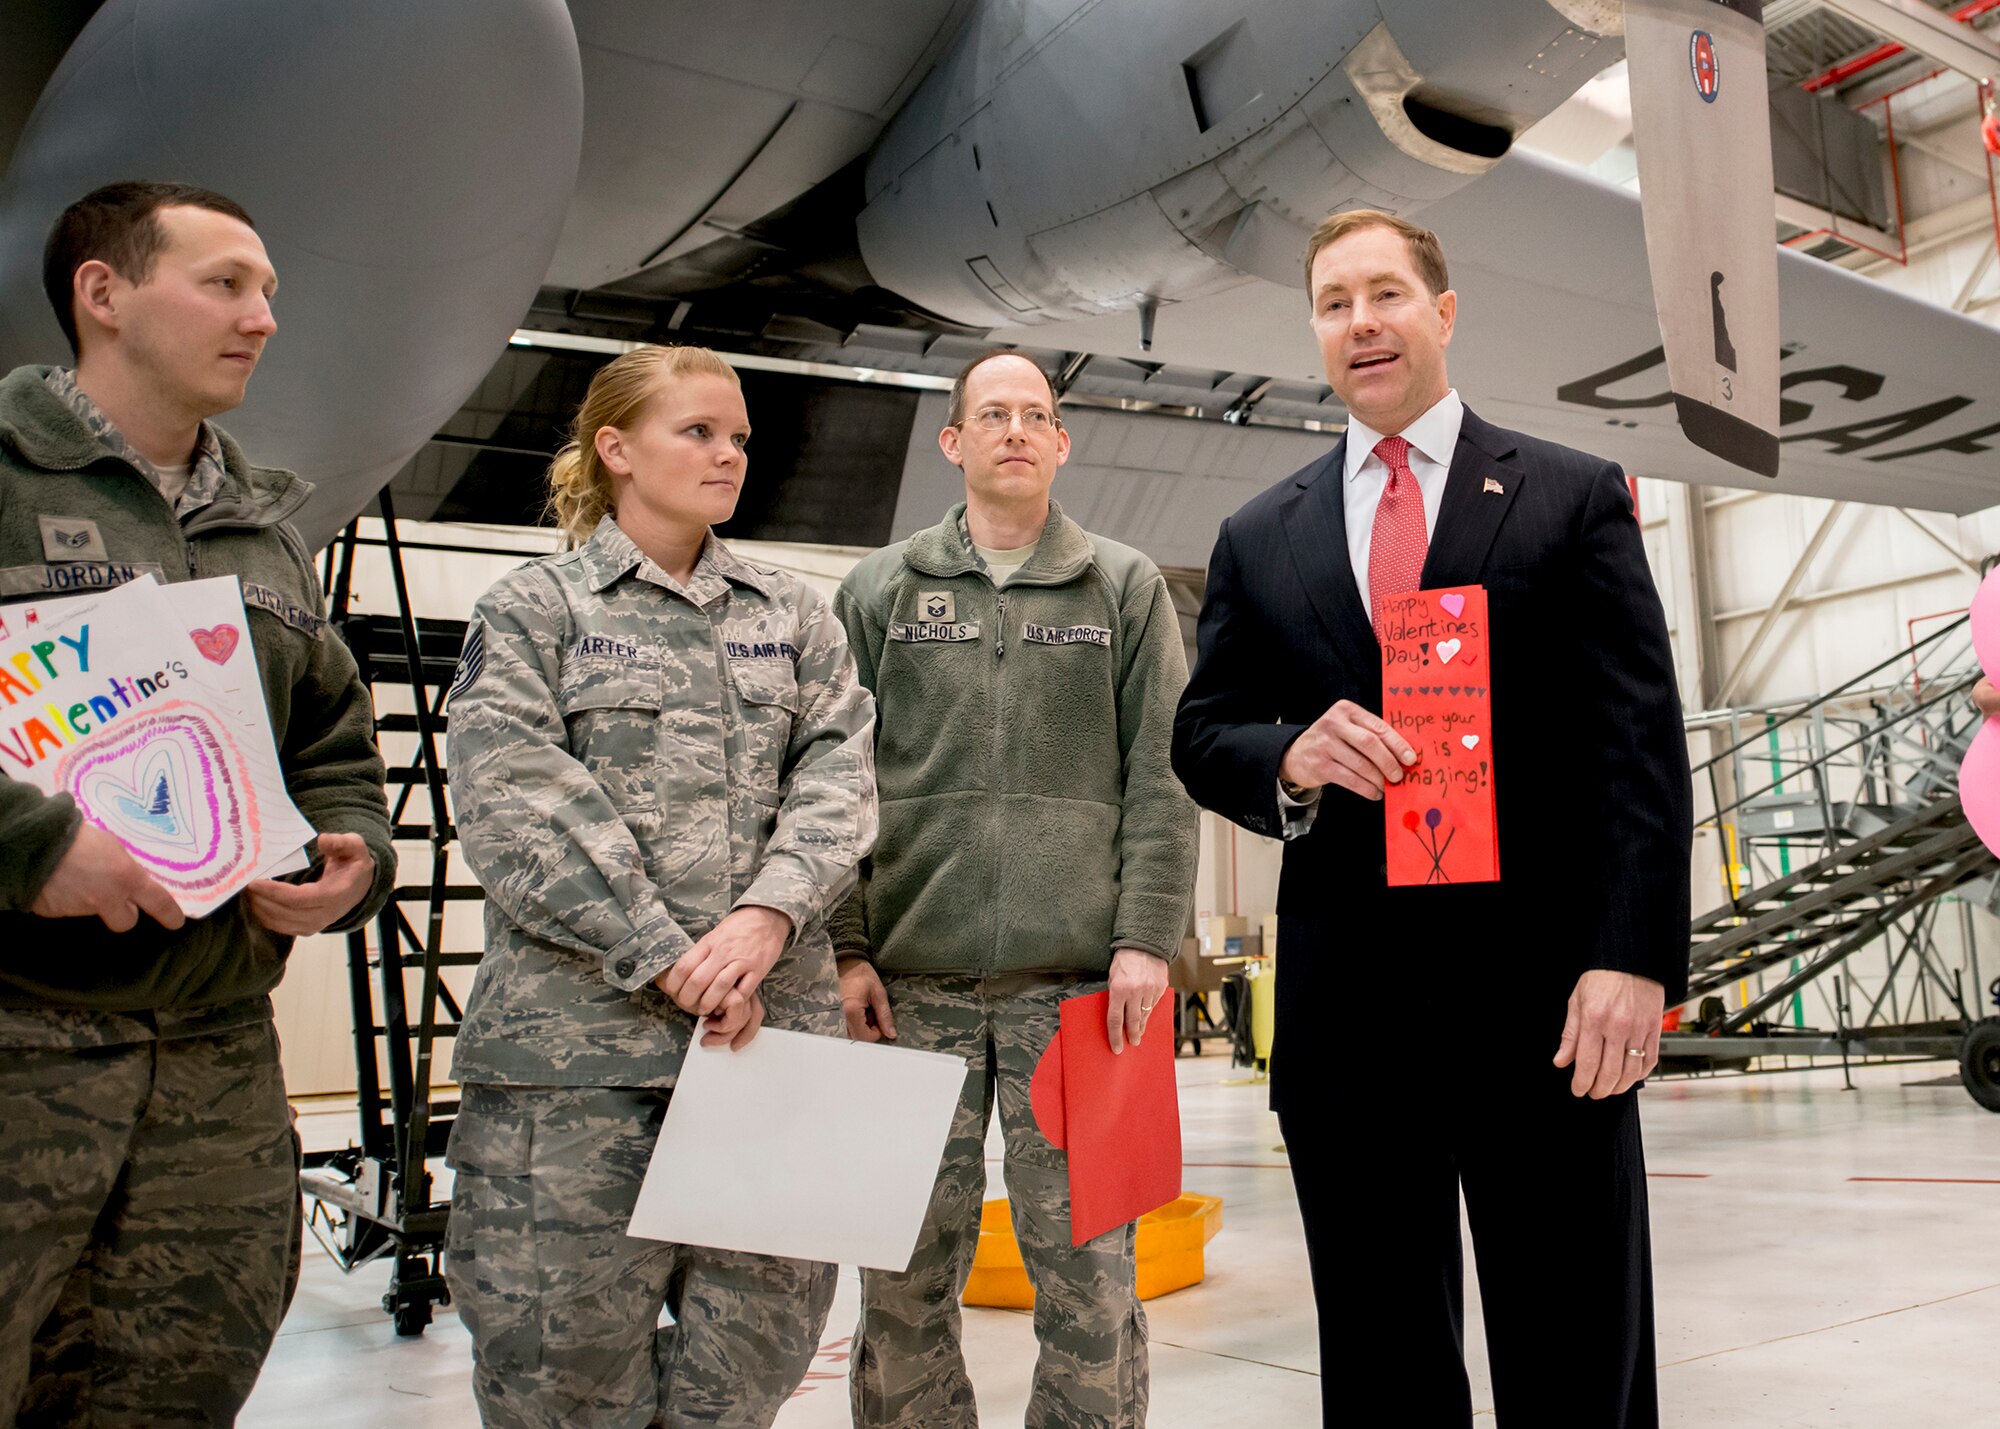 Erie County Legislator Edward A. Rath III, meets with members of the 914th and 107th Airlift Wings while he delivers hundreds of Valentine’s Day cards made by local school children during a presentation at the Niagara Falls Air Reserve Station February 7, 2014, Niagara Falls, NY. In the weeks leading up to Valentine’s Day, Legislator Rath visited the schools to personally collect the cards and thank the students for their participation. When meeting with the students, Legislator Rath encouraged them to honor veterans year round and to always thank a veteran or member of the military when they have a chance. (U.S. Air Force photo by Tech. Sgt. Joseph McKee)